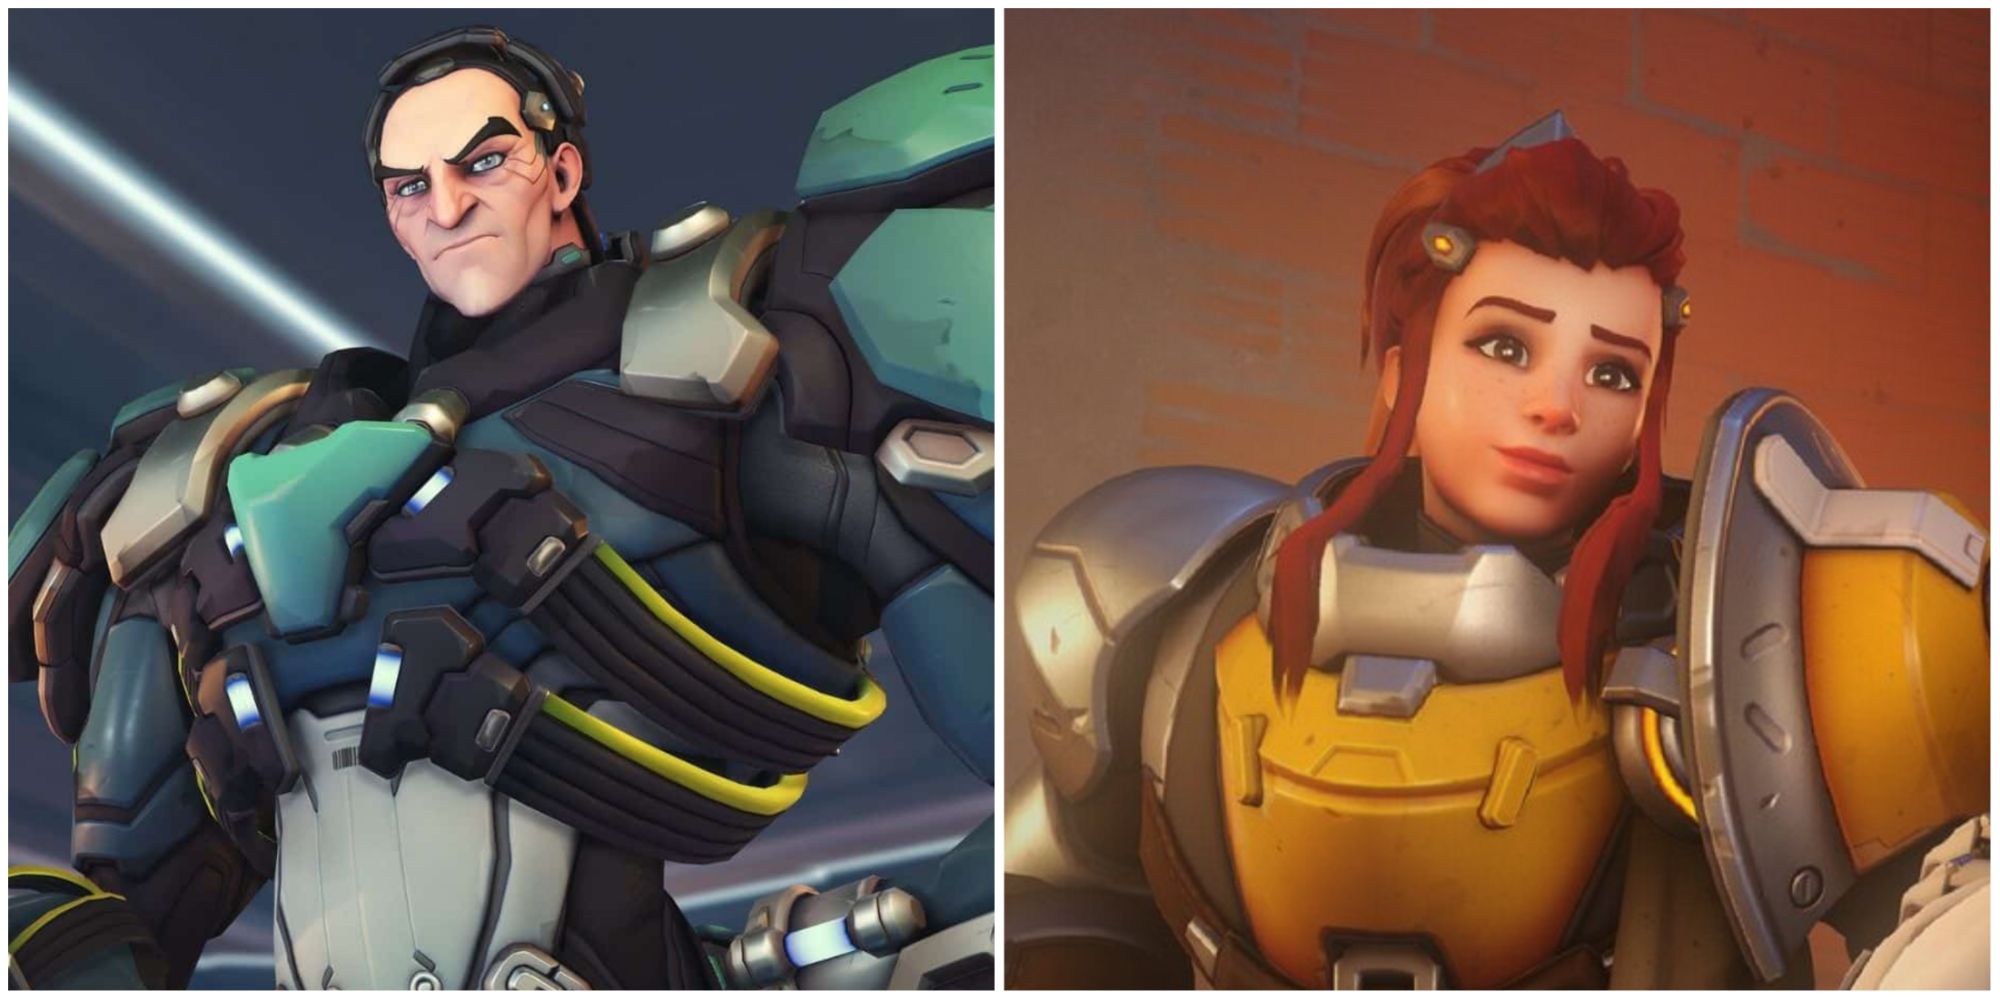 sigma and brigitte next to each other